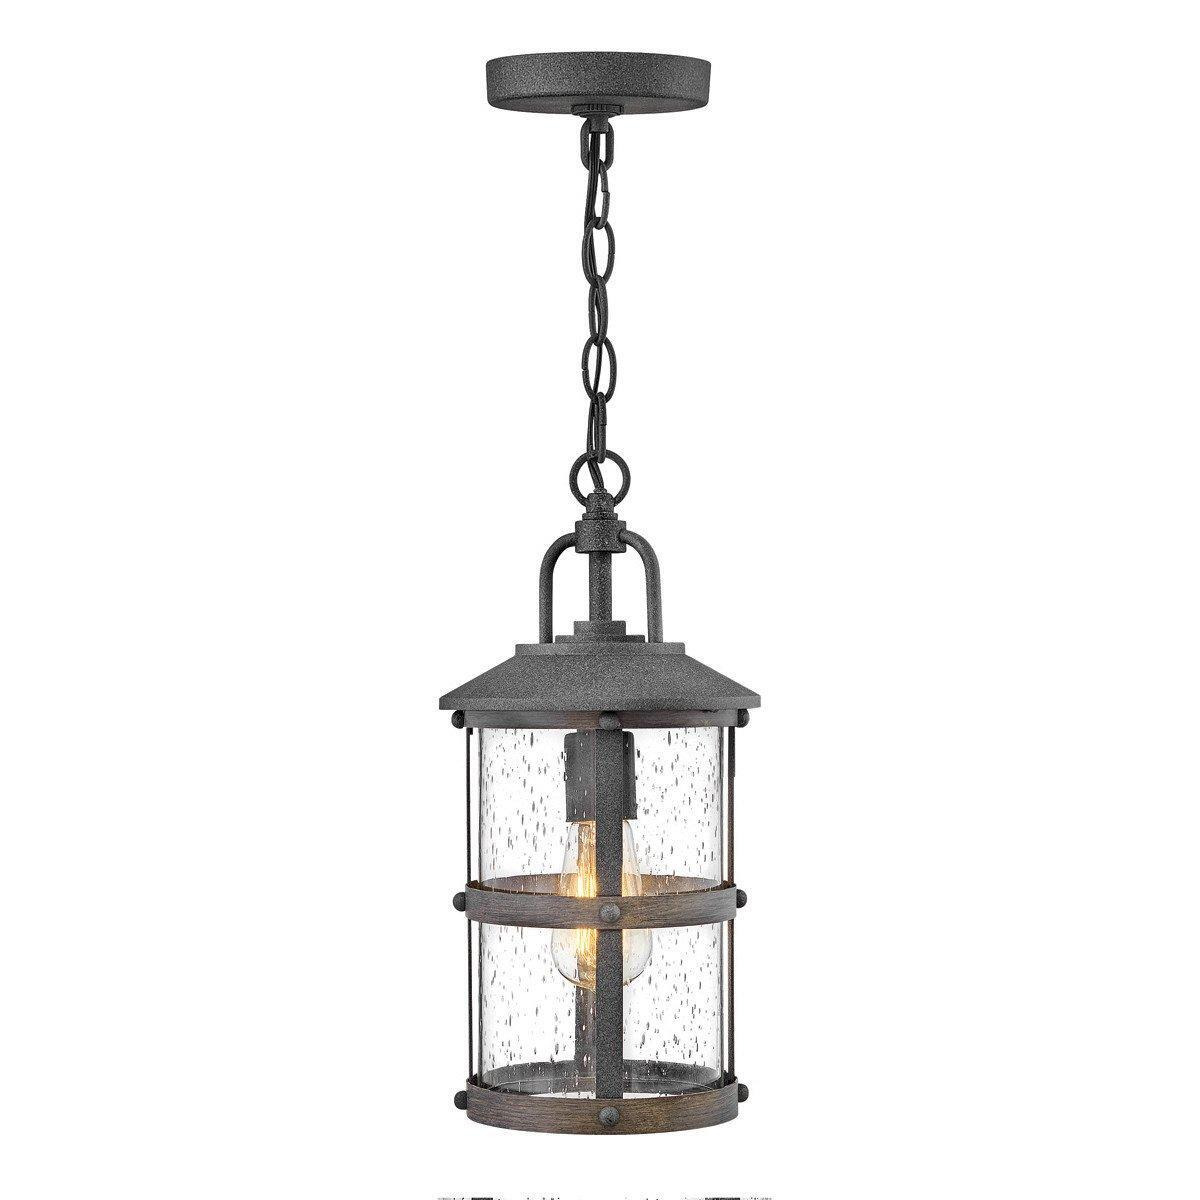 Hinkley Lakehouse Outdoor Pendant Ceiling Light Aged Zinc with Driftwood Grey IP44 - image 1